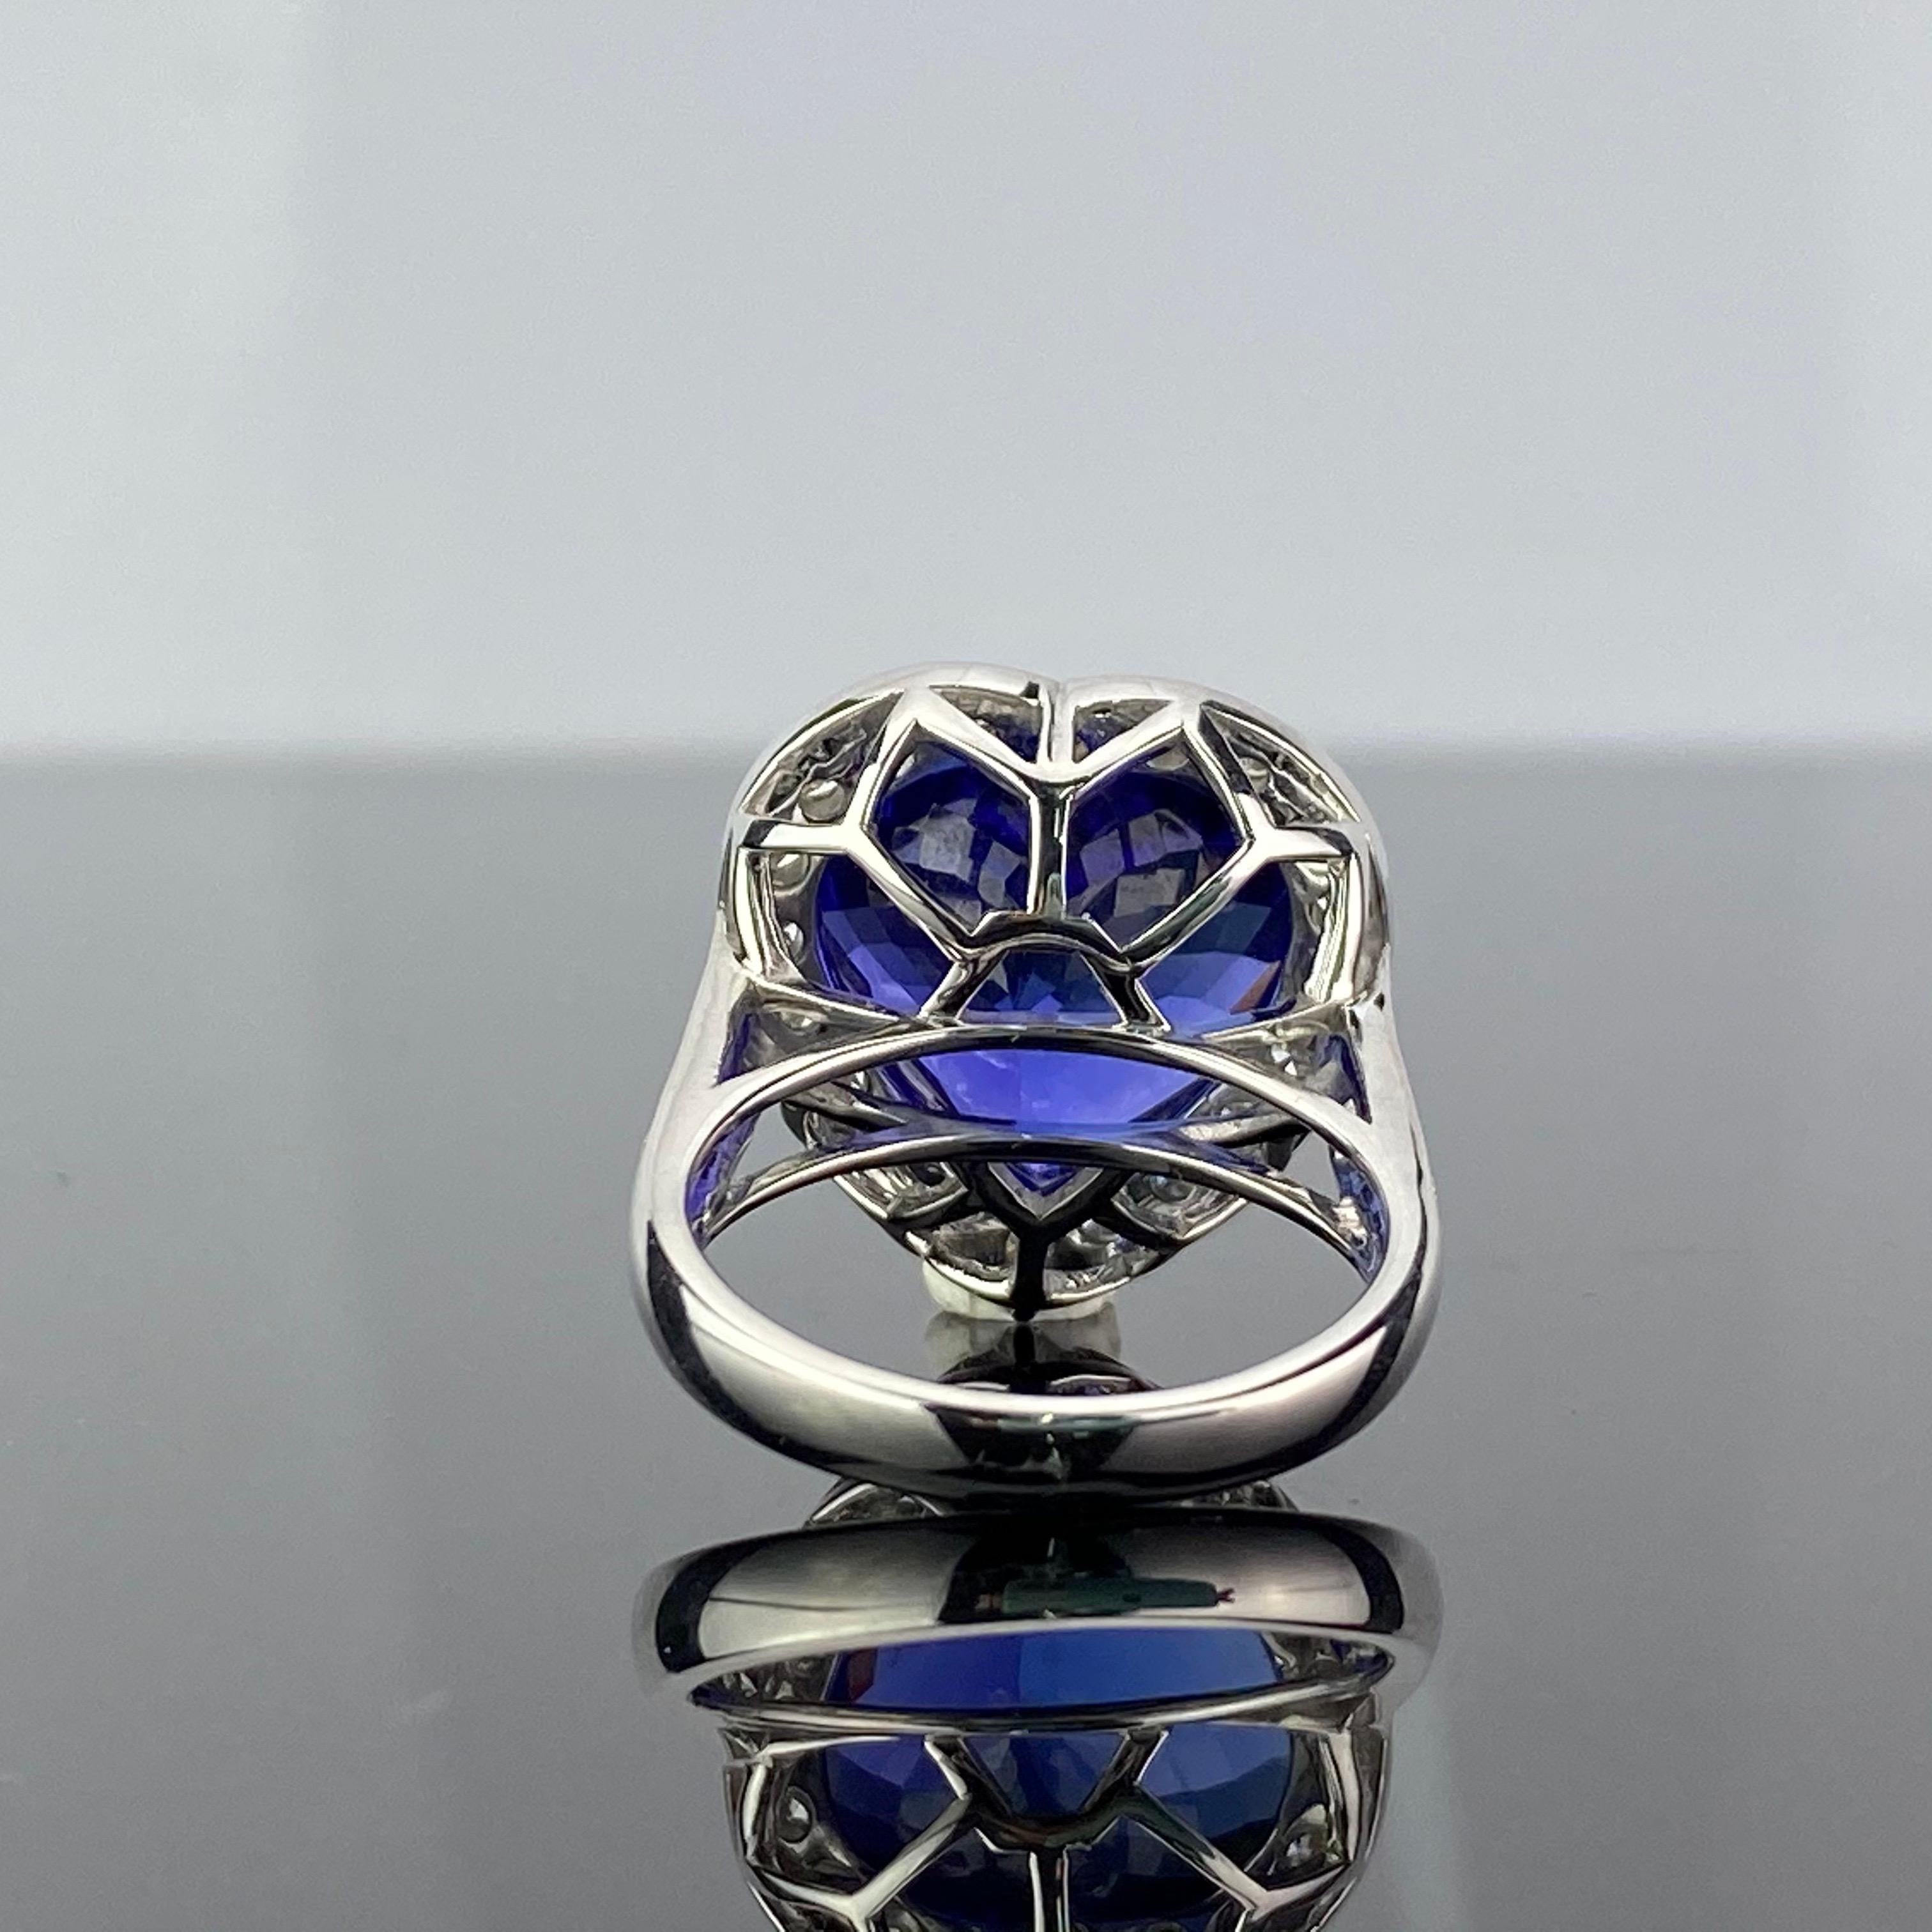 A beautiful 20.16 carat heart-shape Tanzanite engagement cocktail ring, with 1.26 carats of VS quality White Diamonds. The Tanzanite is absolutely transparent with no inclusions and a stunning royal blue color. The gemstones are set in 10.09 grams